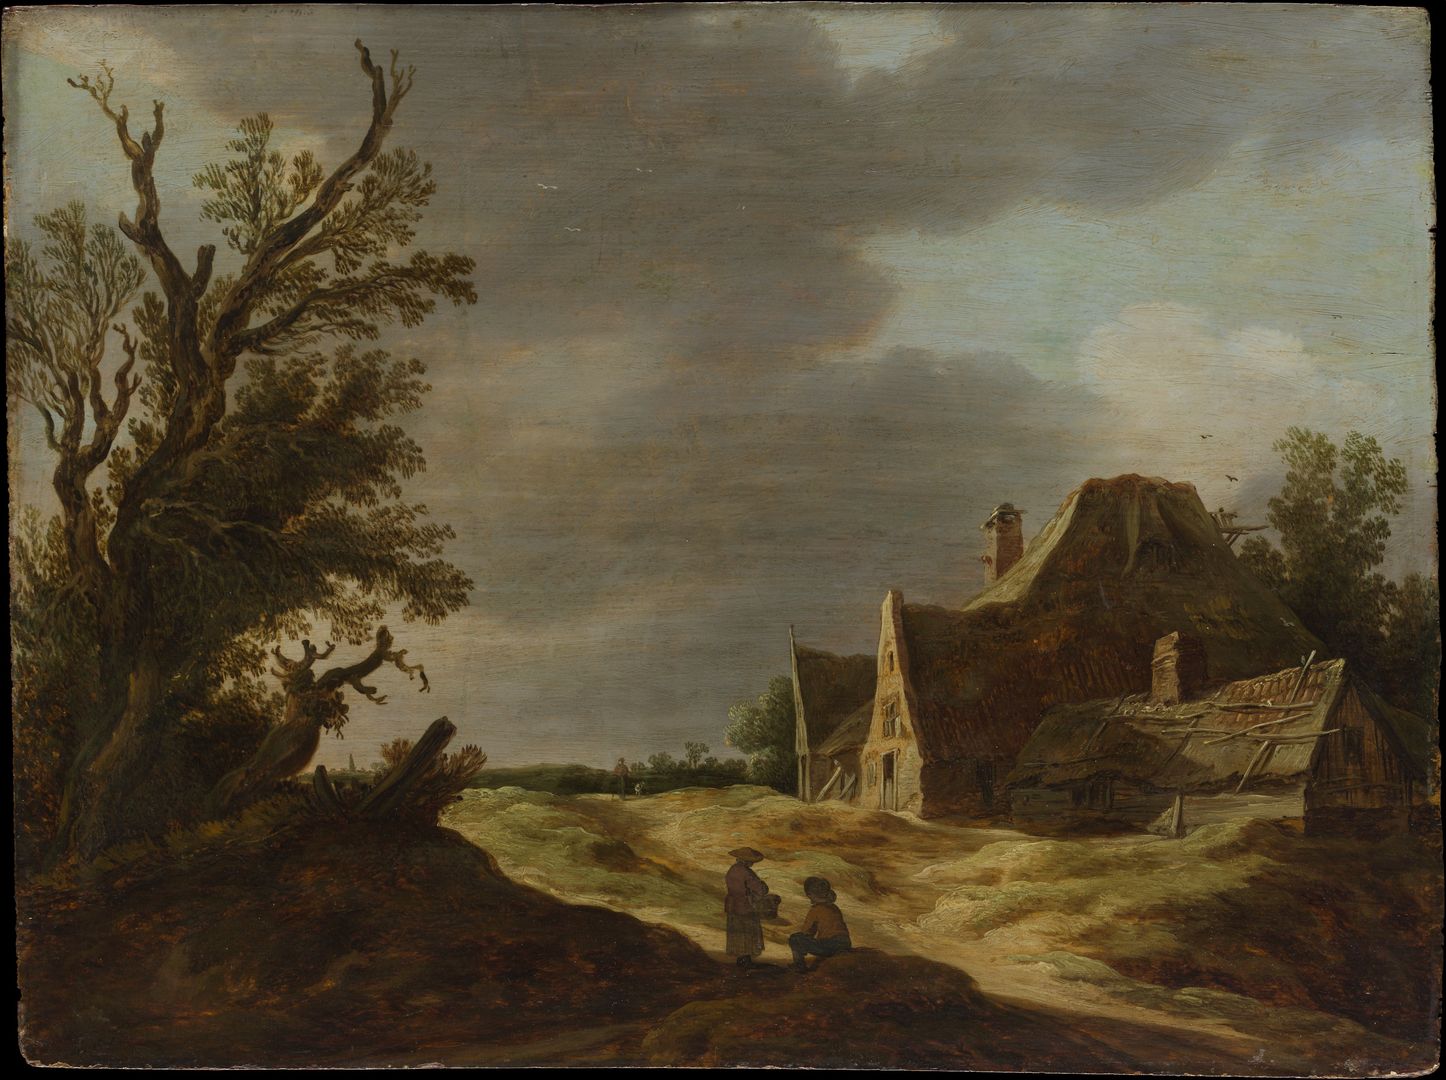 An overcast rural landscape with a tree in shadows in the left foreground, two figures and a sandy road in the midground, and a farmhouse in the right background.